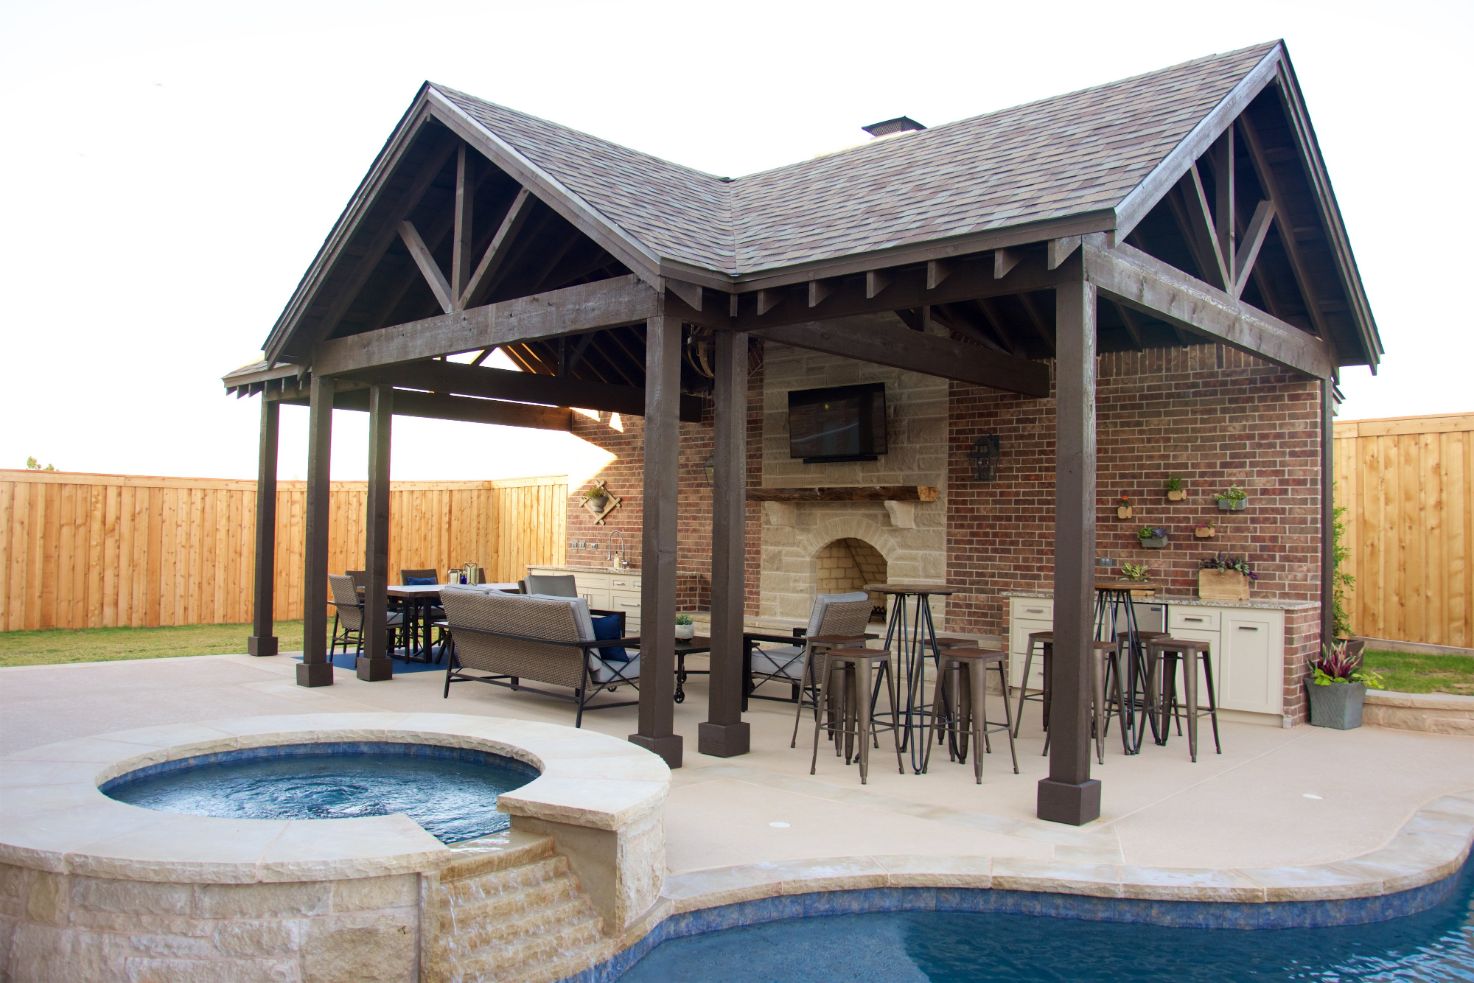 Outdoor Covered Entertainment Area By Pool